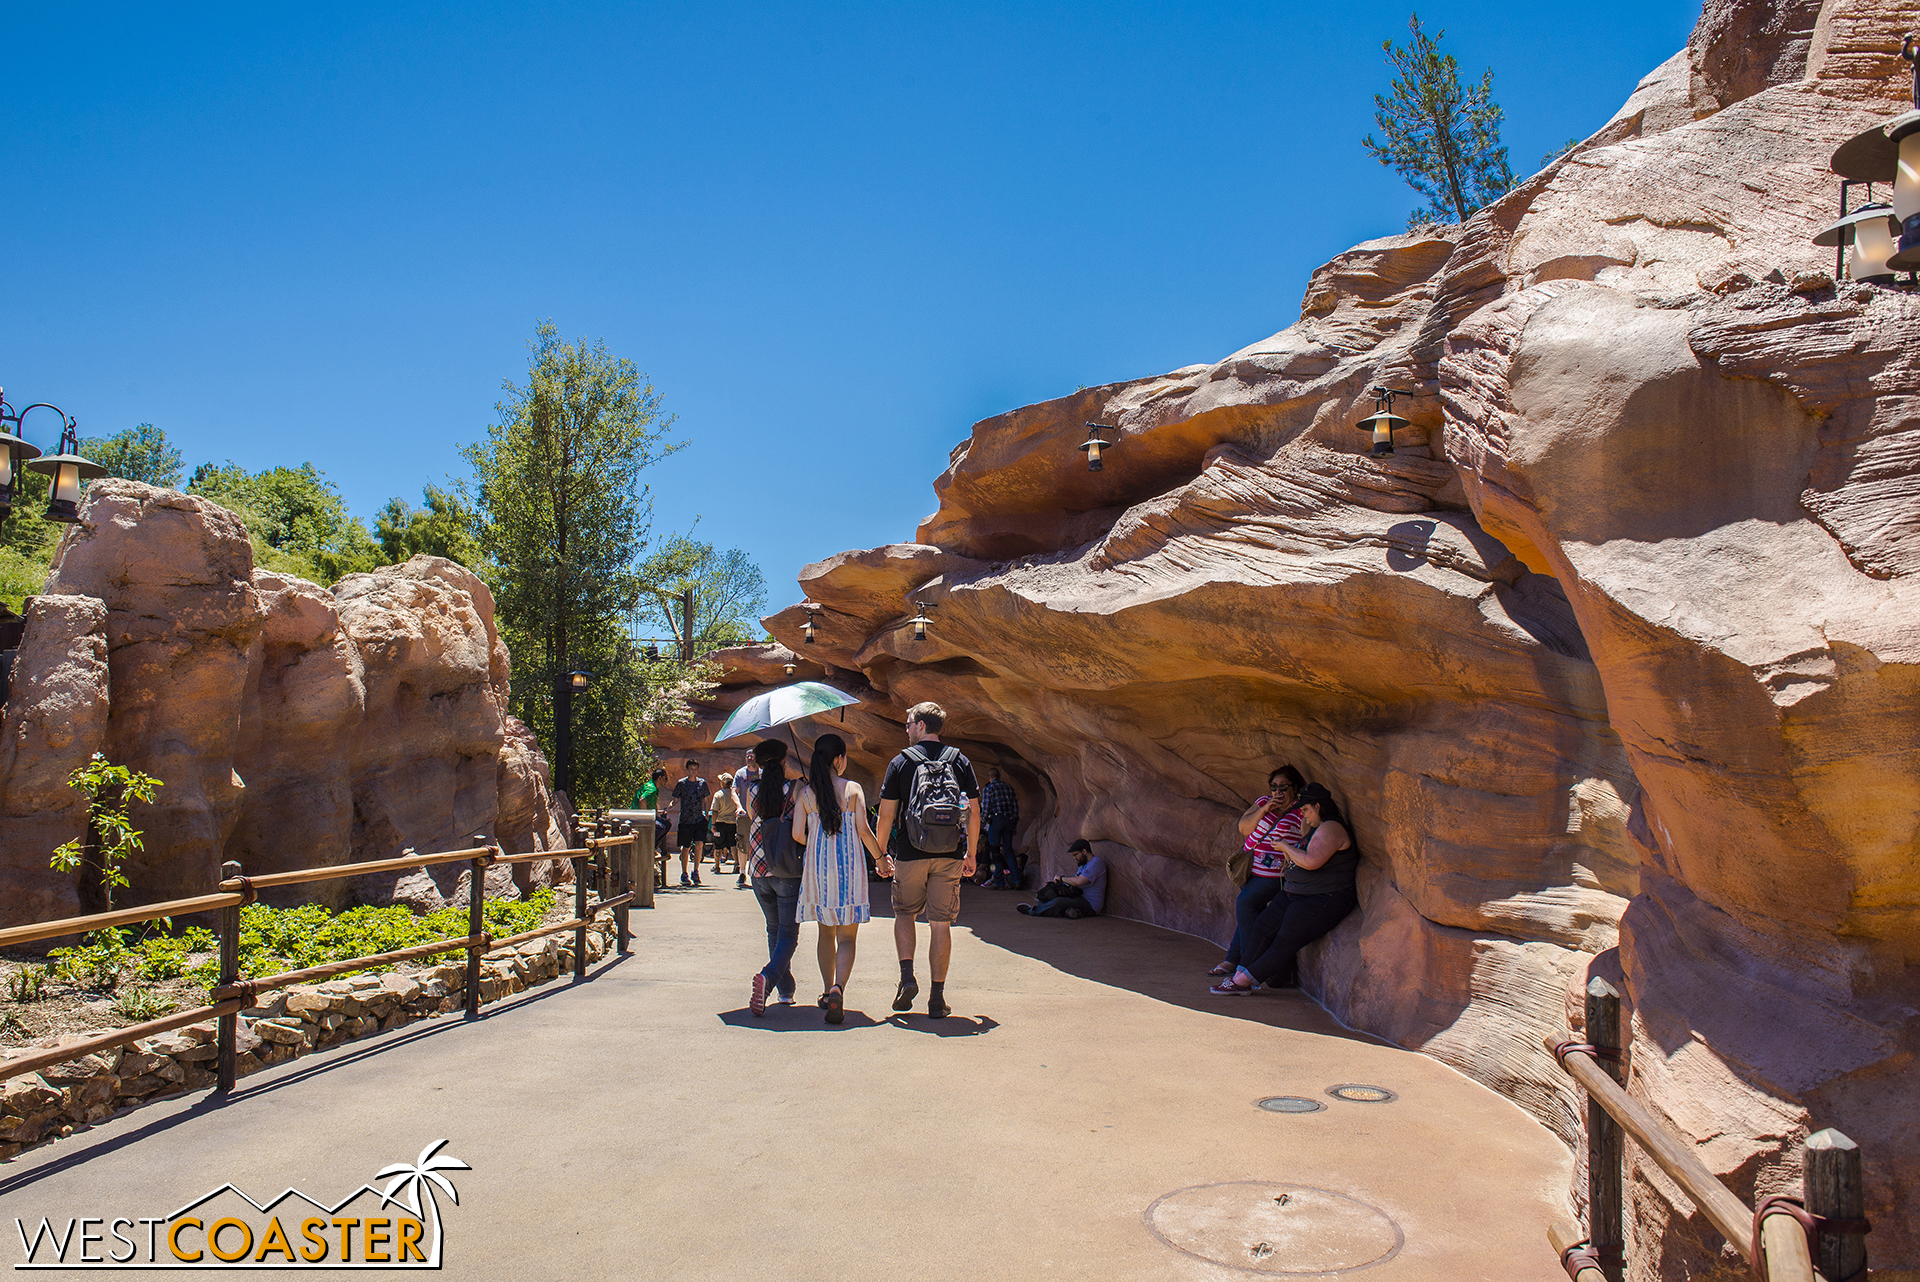  As we continue toward Fantasyland, we can see that the trail actually seems to narrow a bit. 